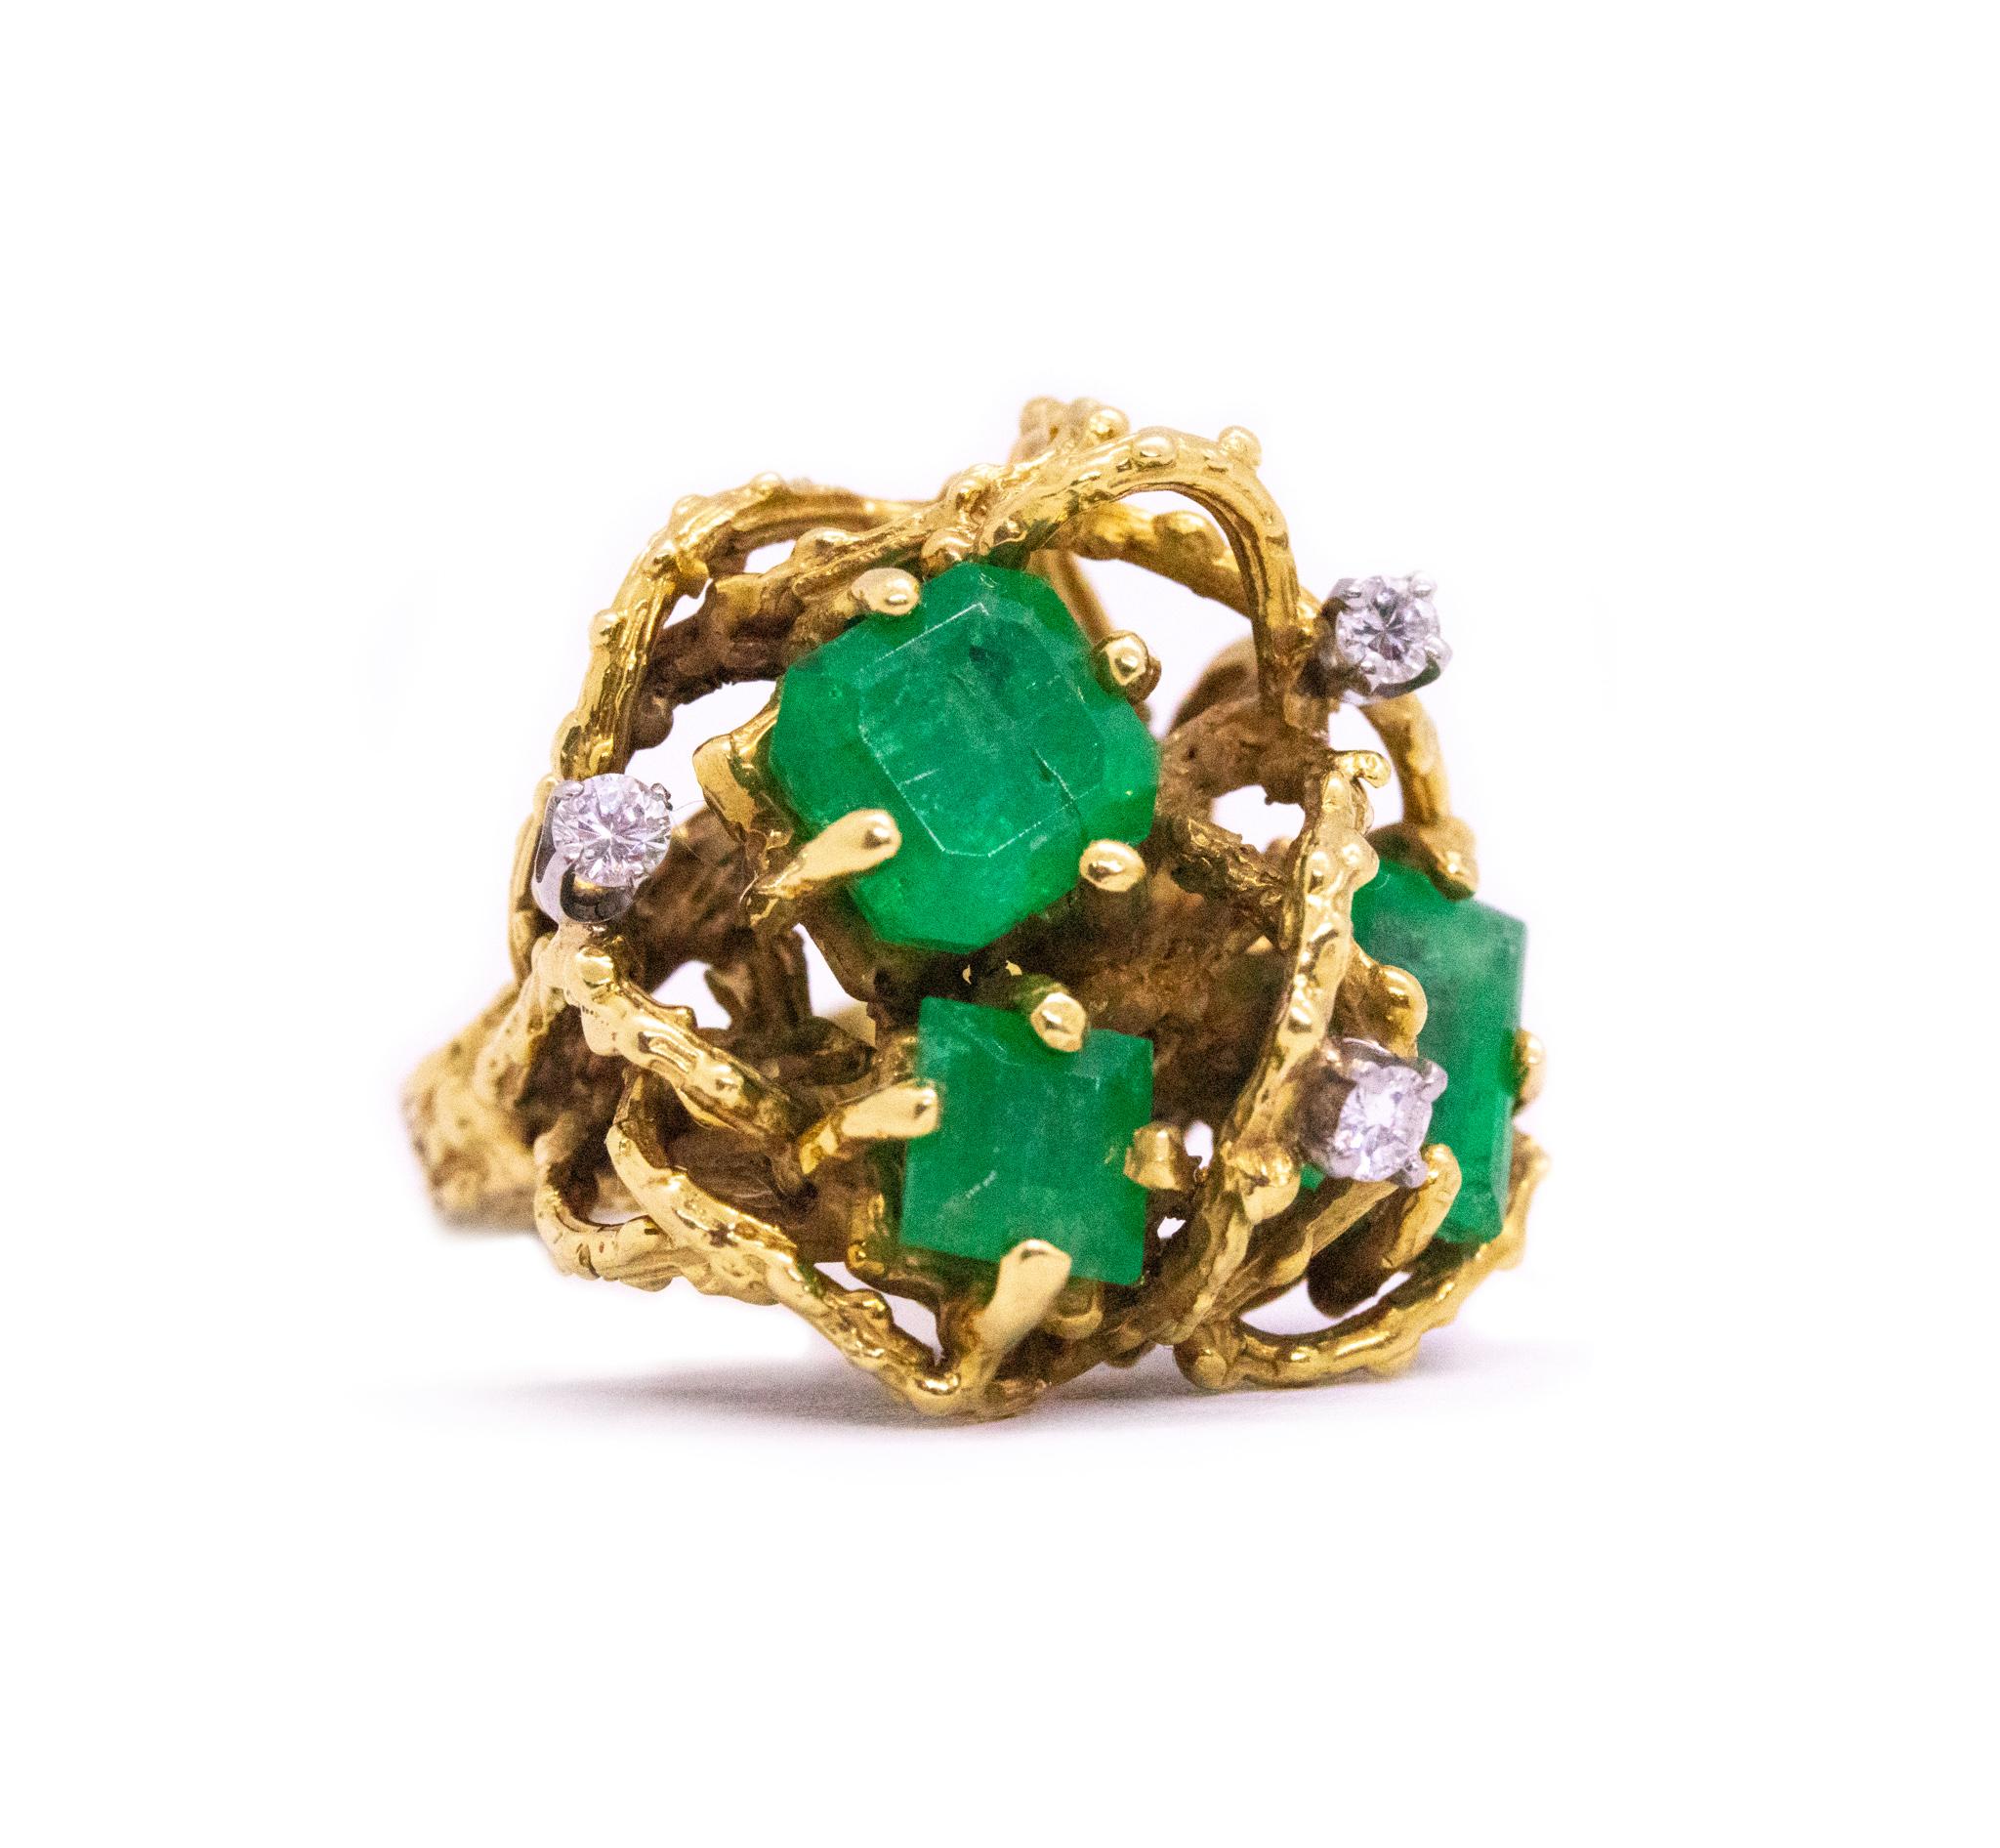 Organic retro cocktail ring from the Mid-Century period.

A studio piece created during the mid-century period, circa 1960. It was crafted with organic roots pattern by the lost wax method in solid yellow gold of 18 karats 

Embellished, with three